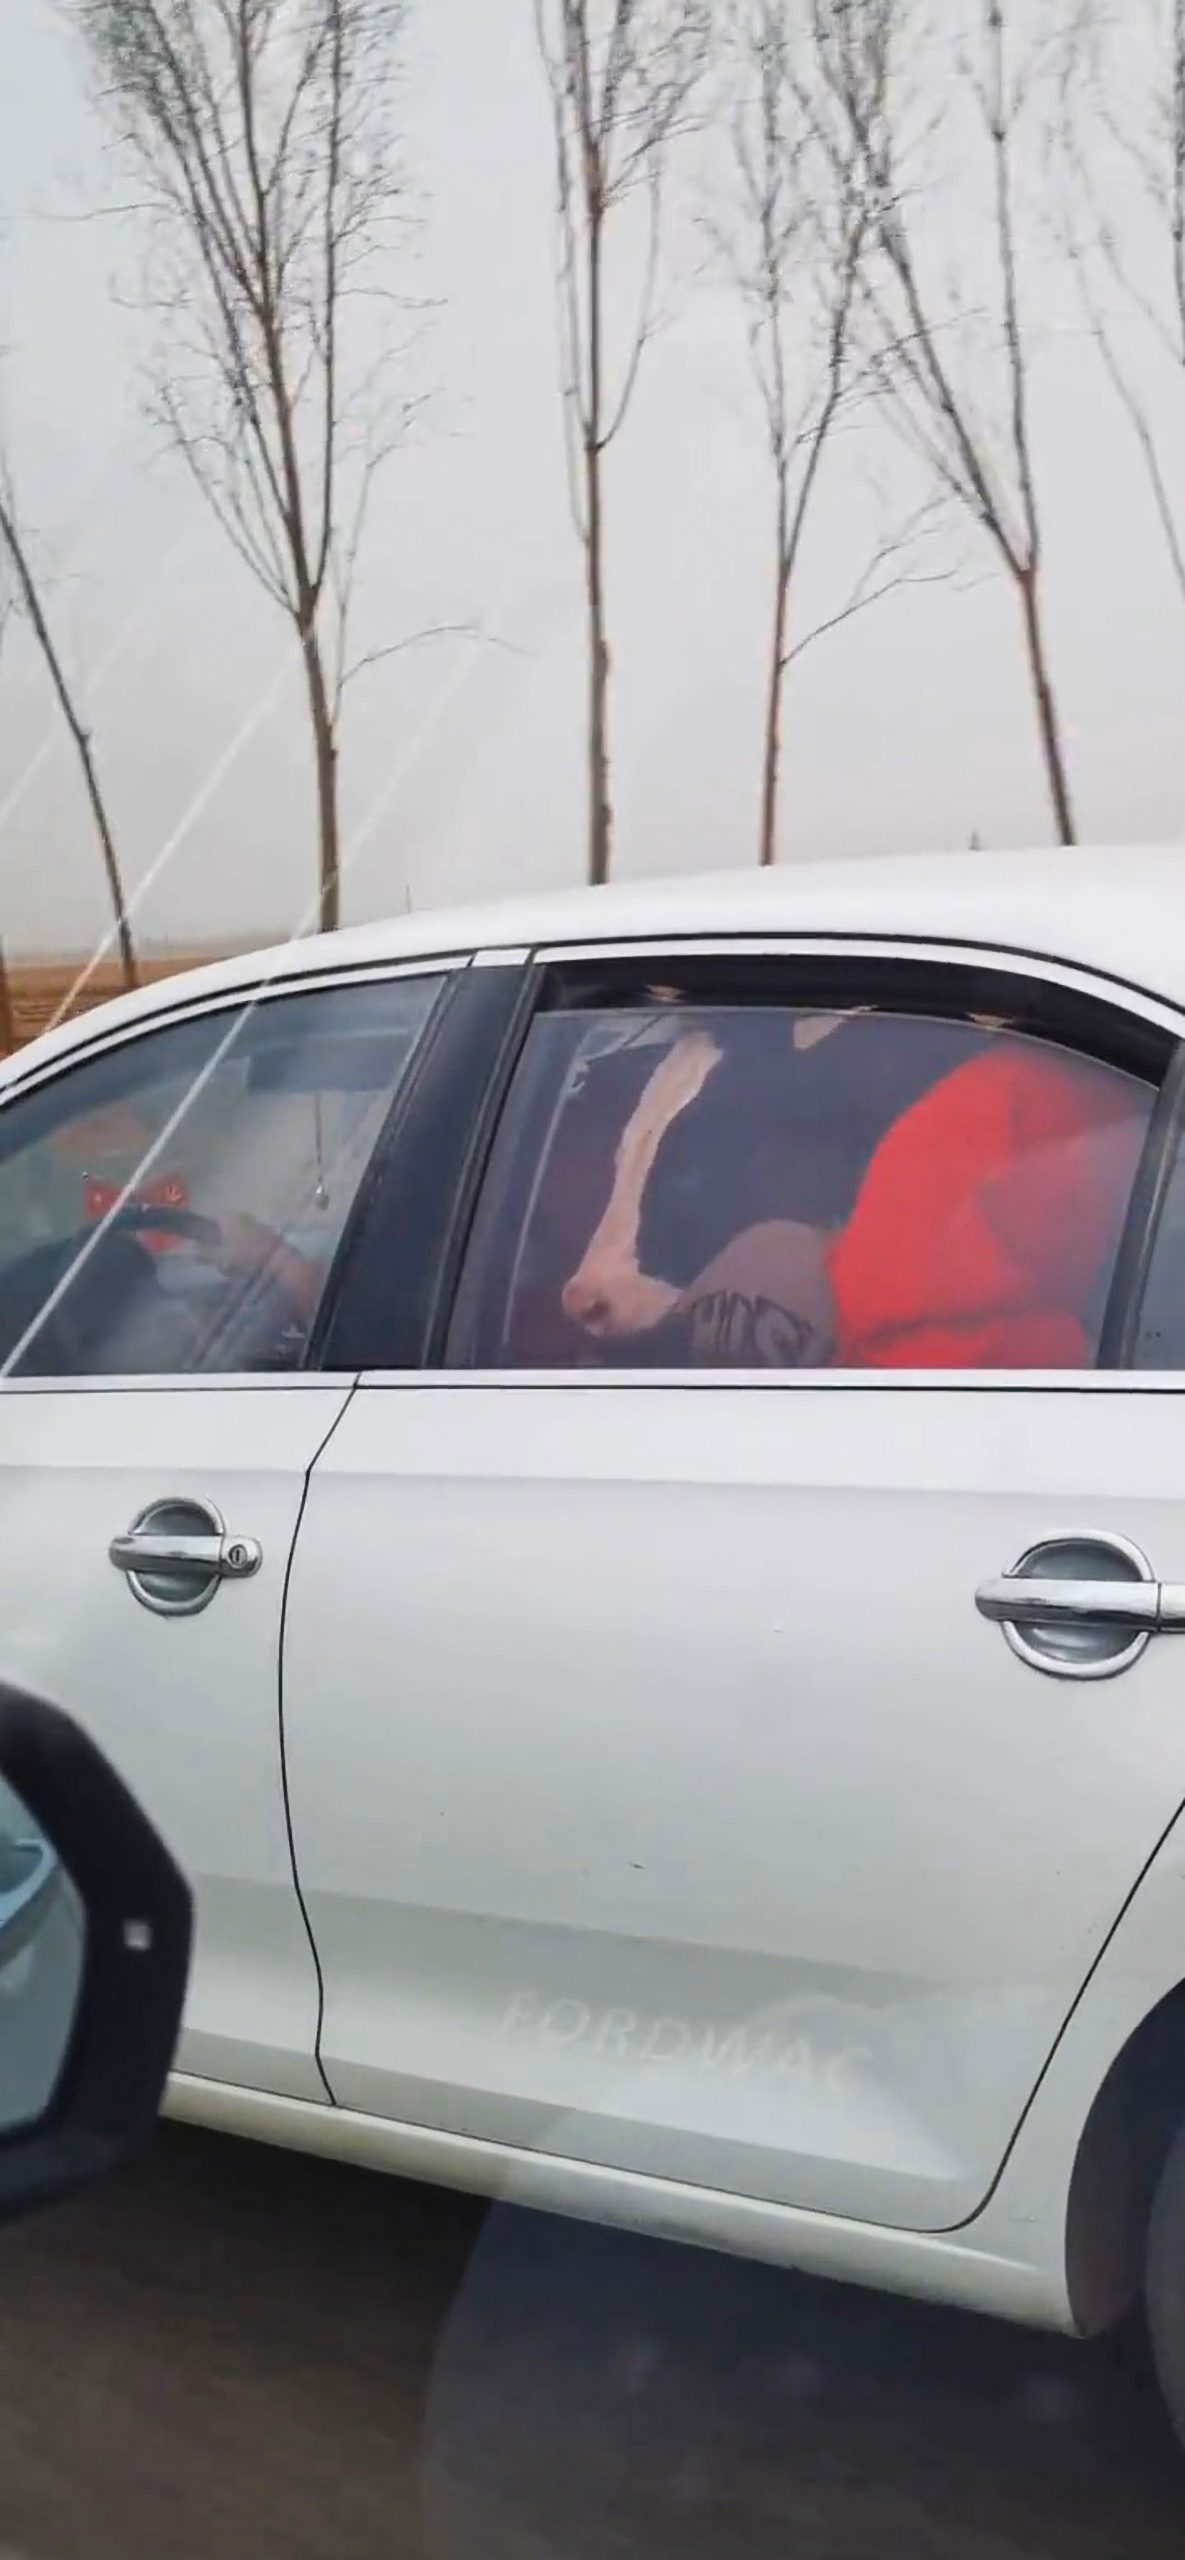 Read more about the article Cow Sits On Familys Lap In Backseat Of Car On Chinese Motorway